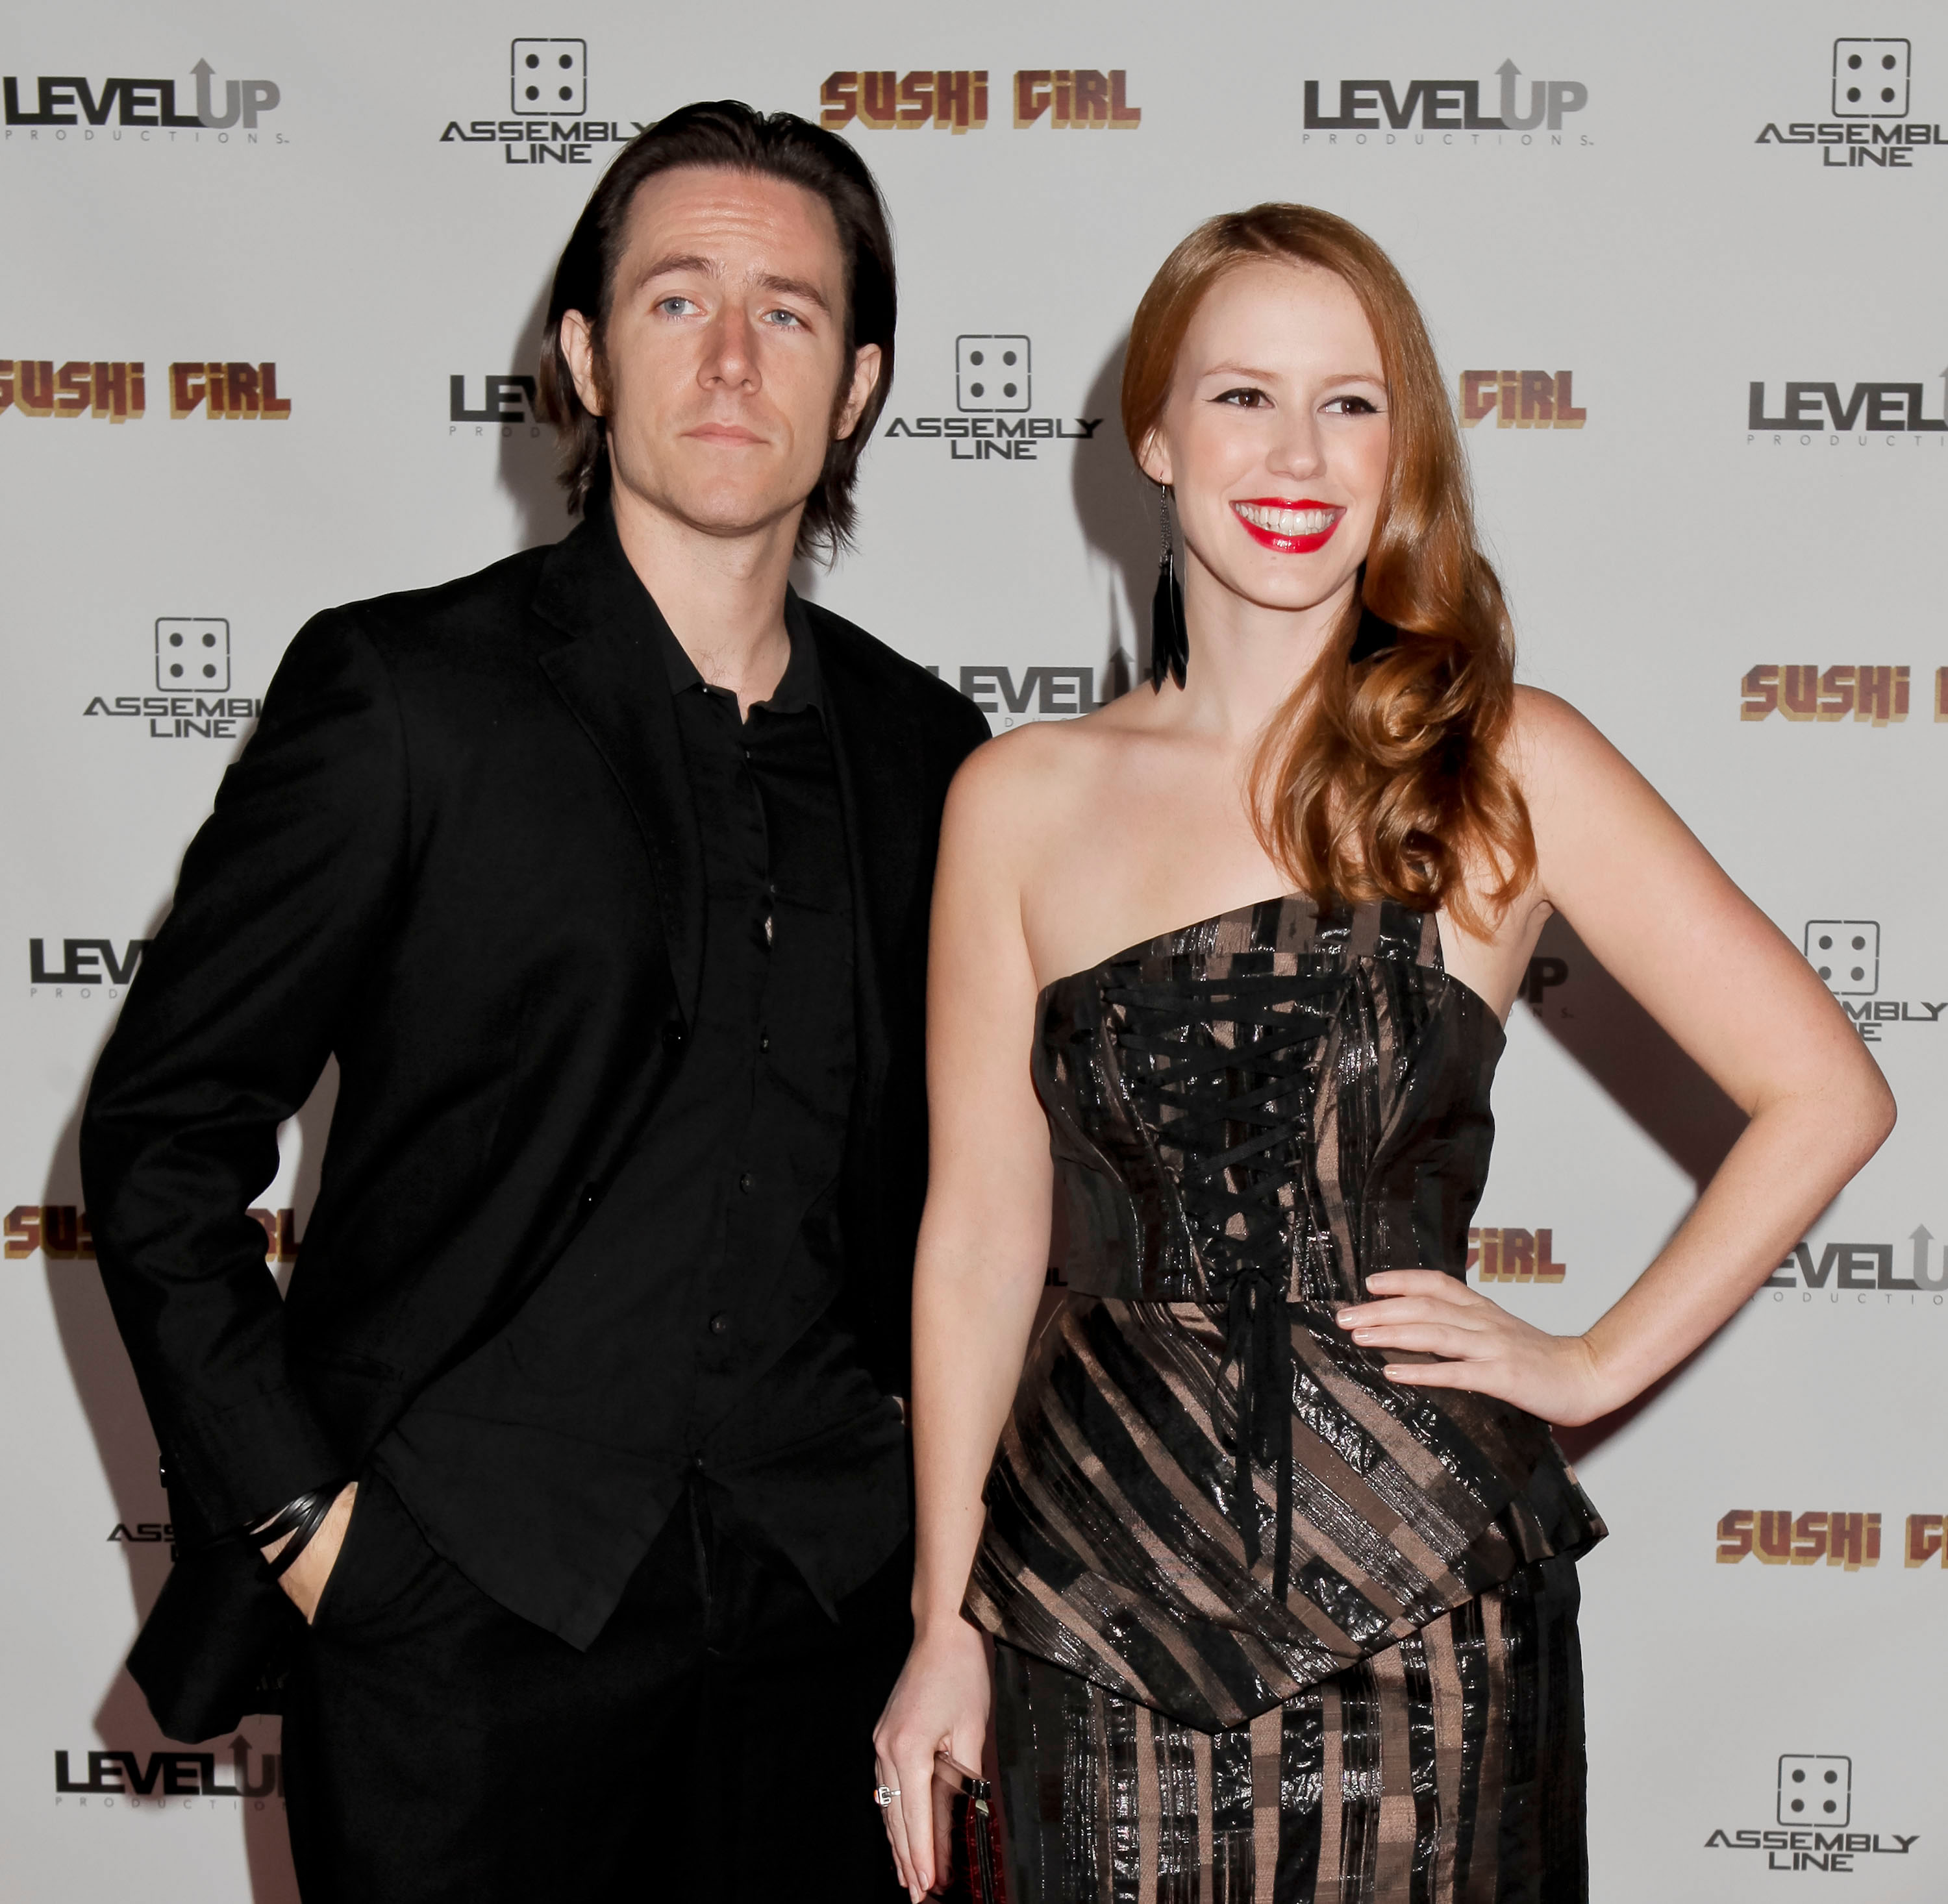 Matthew Mercer and Marisha Ray attend the "Sushi Girl" Los Angeles premiere at Grauman's Chinese Theatre on November 27, 2012, in Hollywood, California. | Source: Getty Images